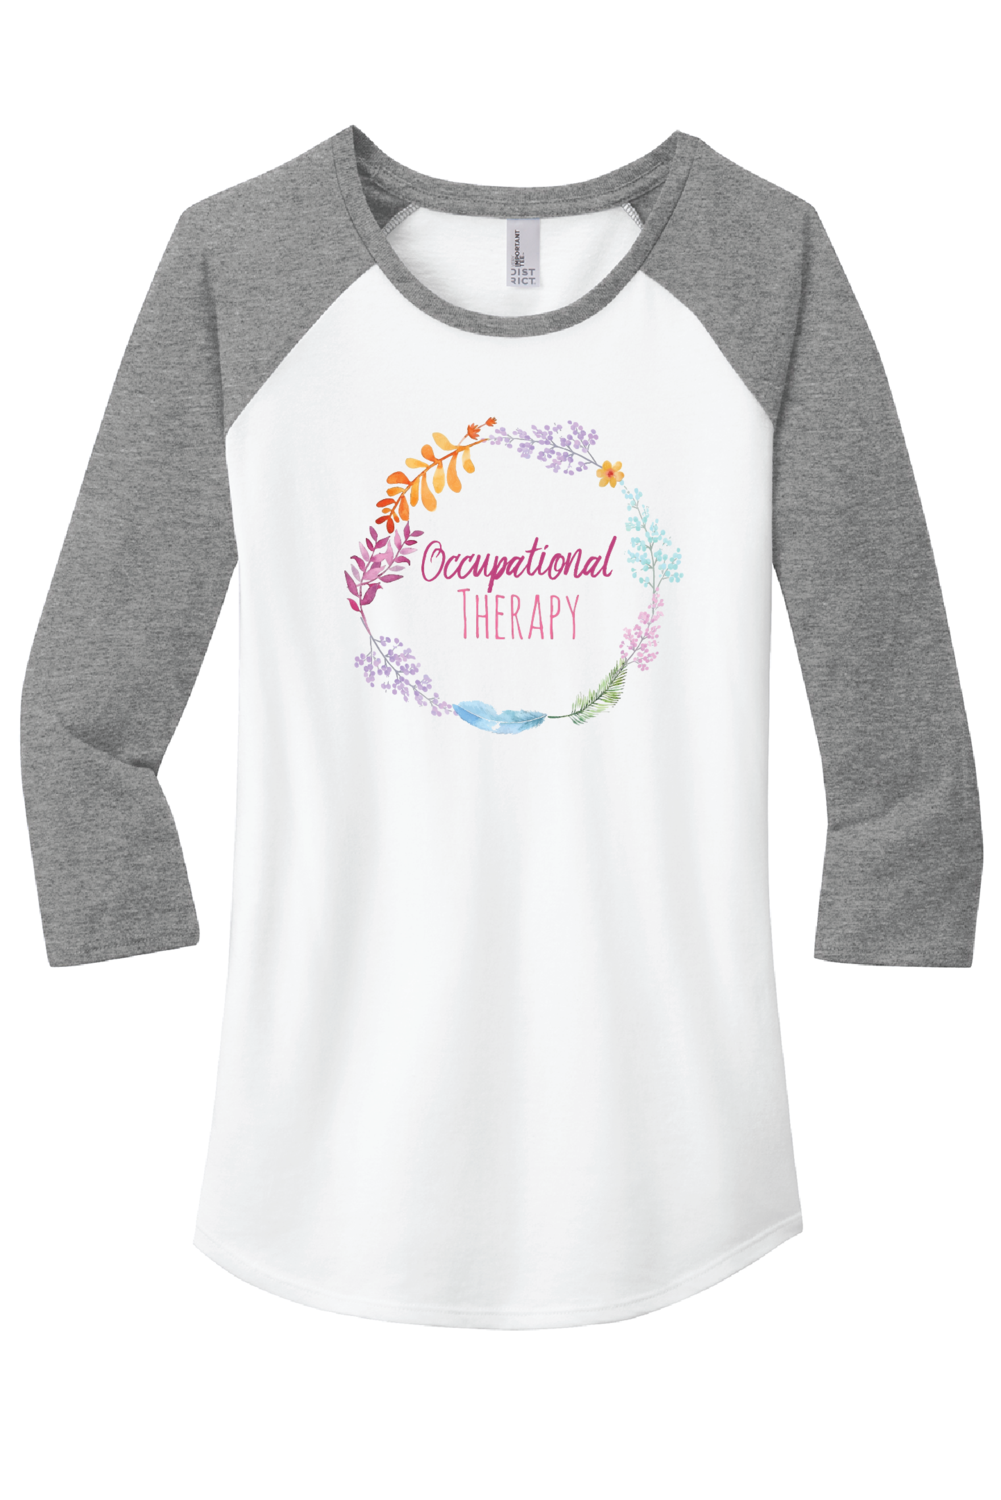 Occupational Therapy Shirt